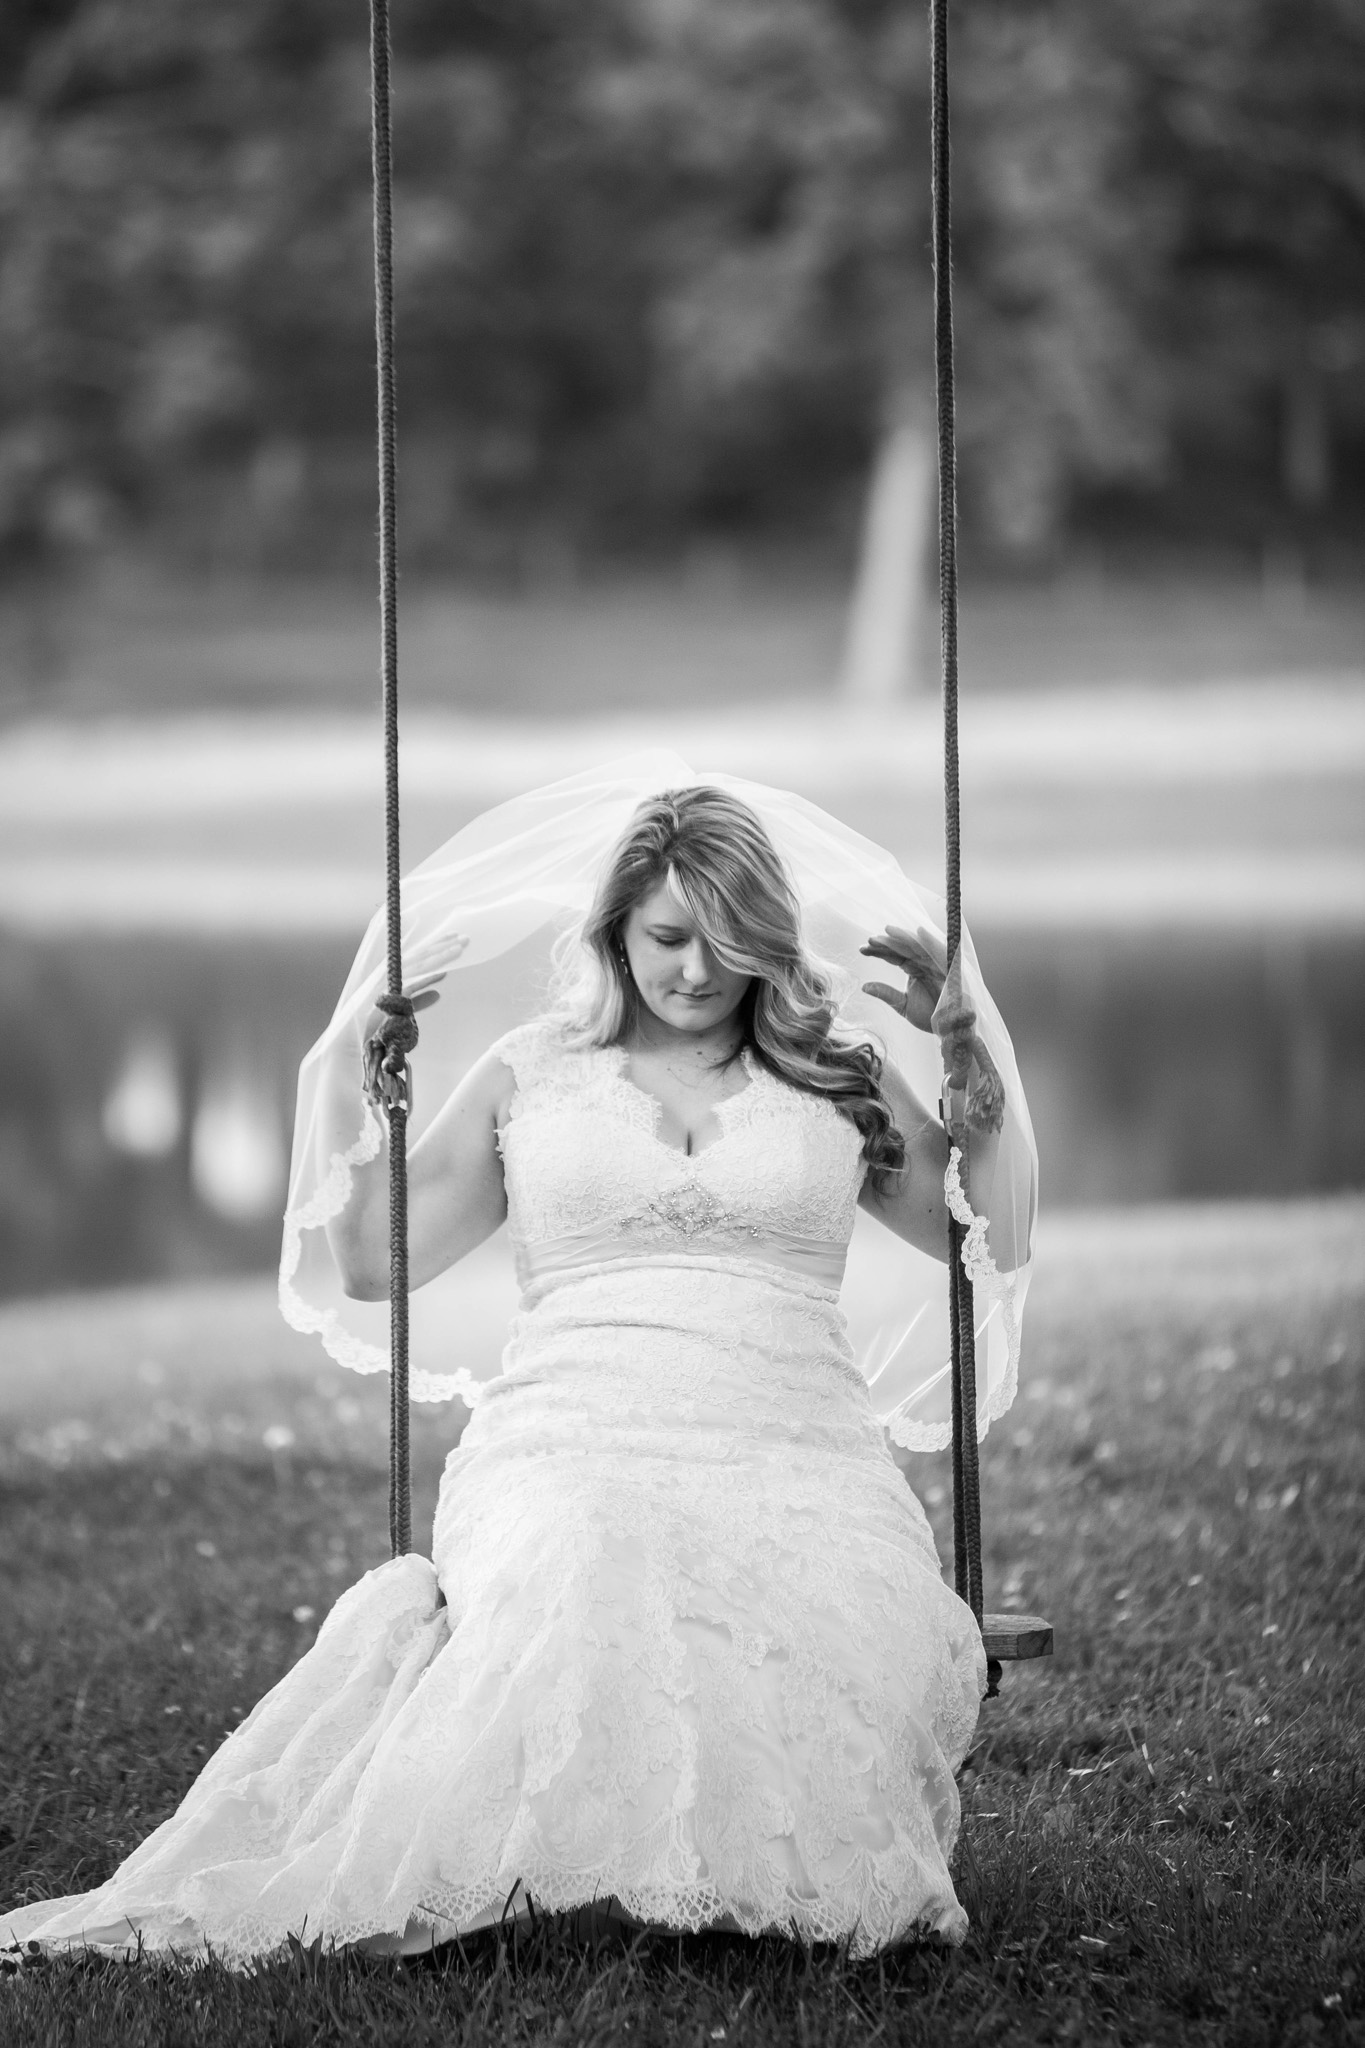 Mabyn Ludke Photography captured a lovely black and white of a bride on her childhood swing in Asheboro, NC